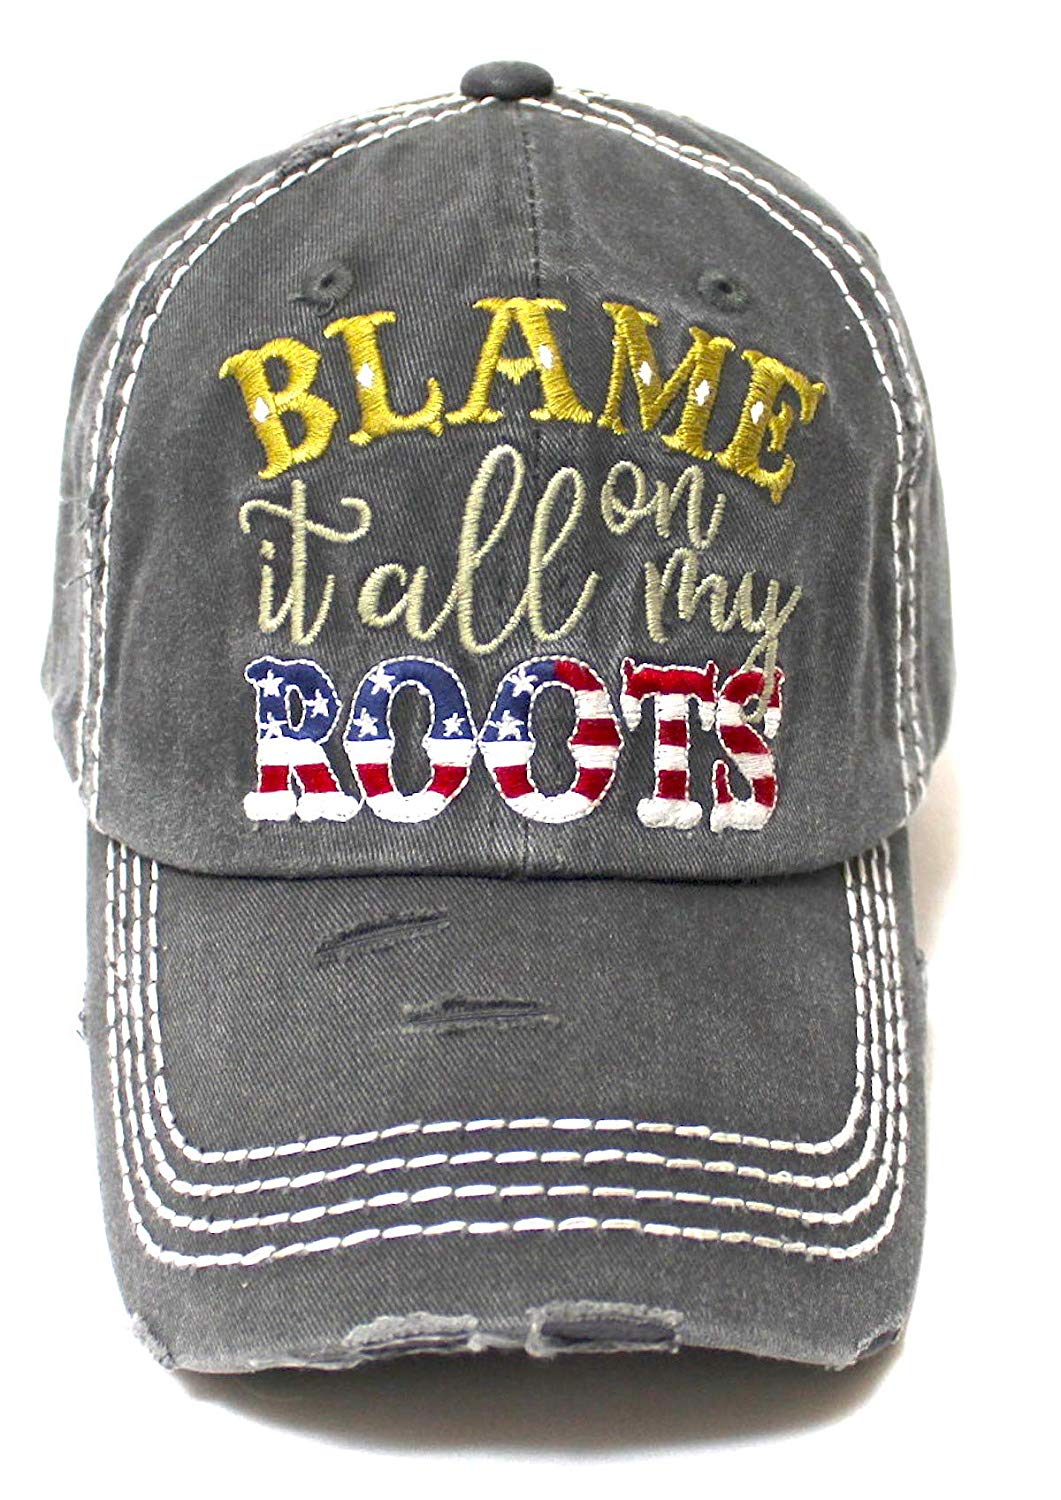 Classic Ballcap Blame it All on My Roots Monogram Embroidery USA Flag Themed Hat, Vintage Black - Caps 'N Vintage 